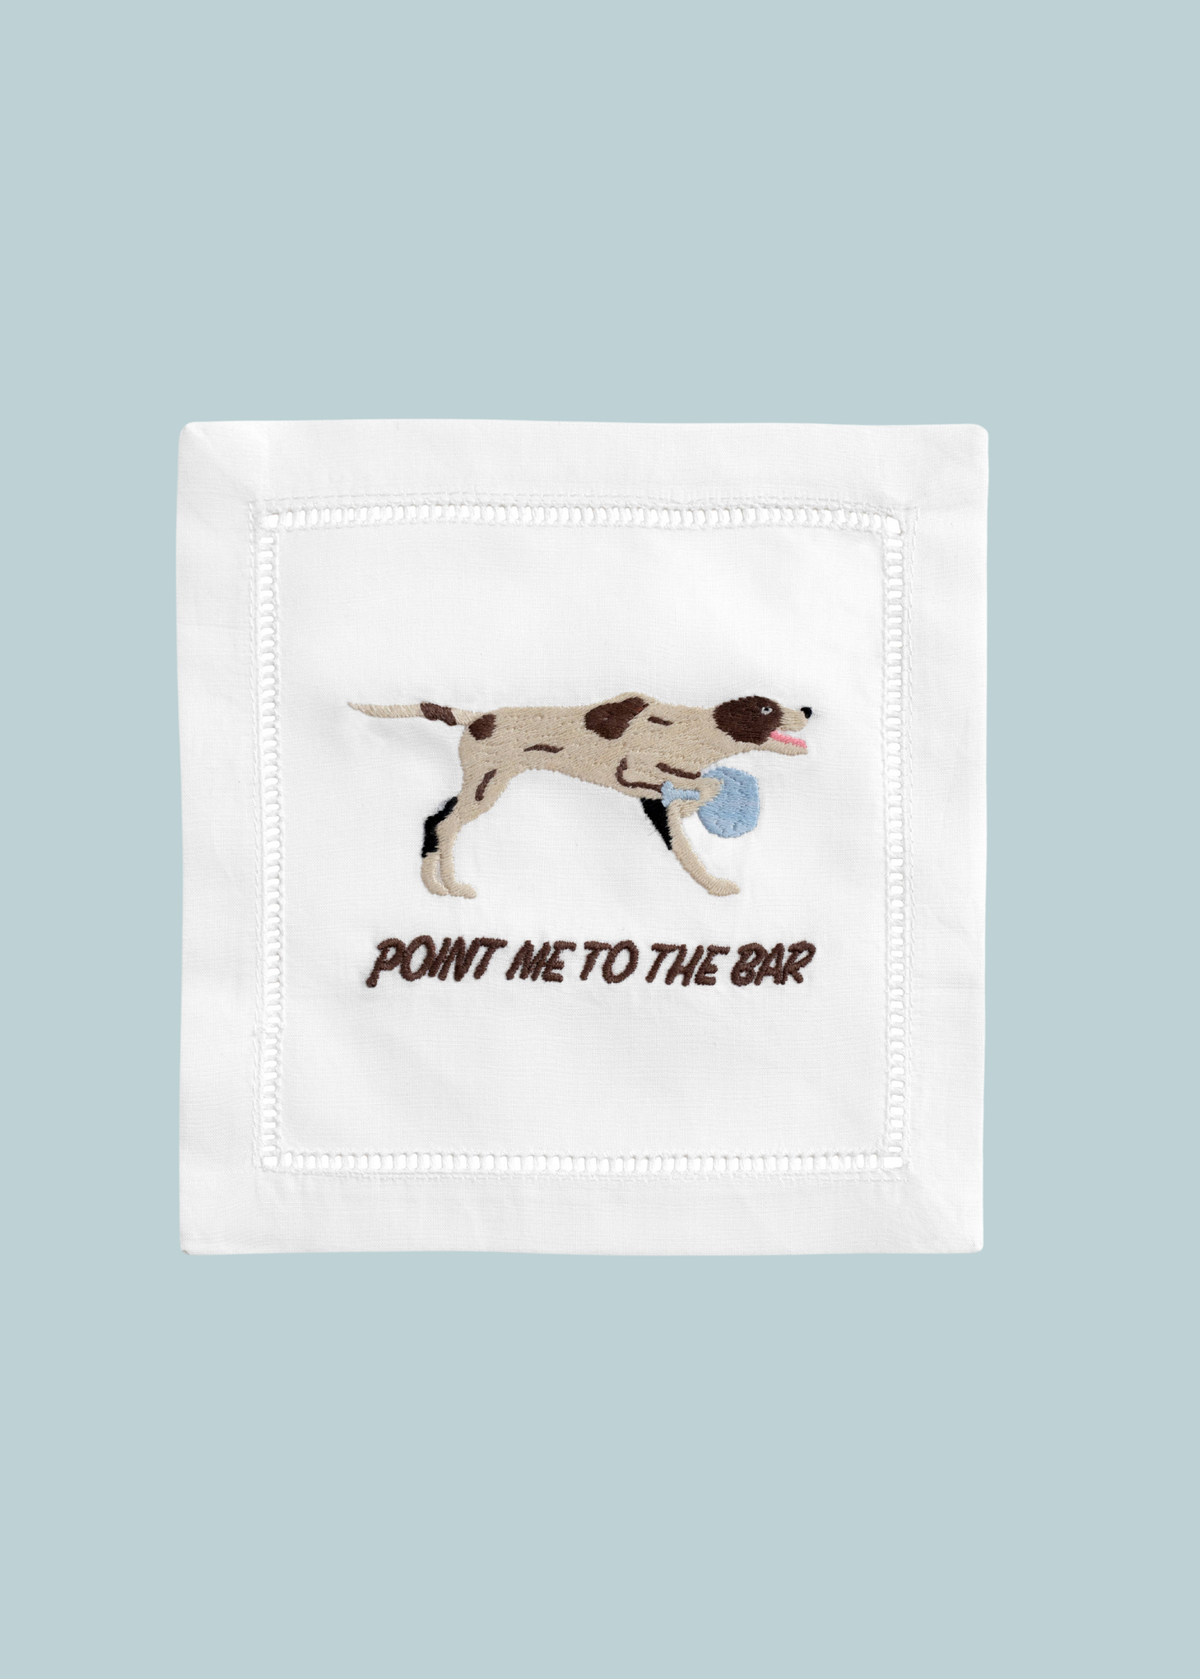 Point Me to the Bar Cocktail Napkin Set of 4